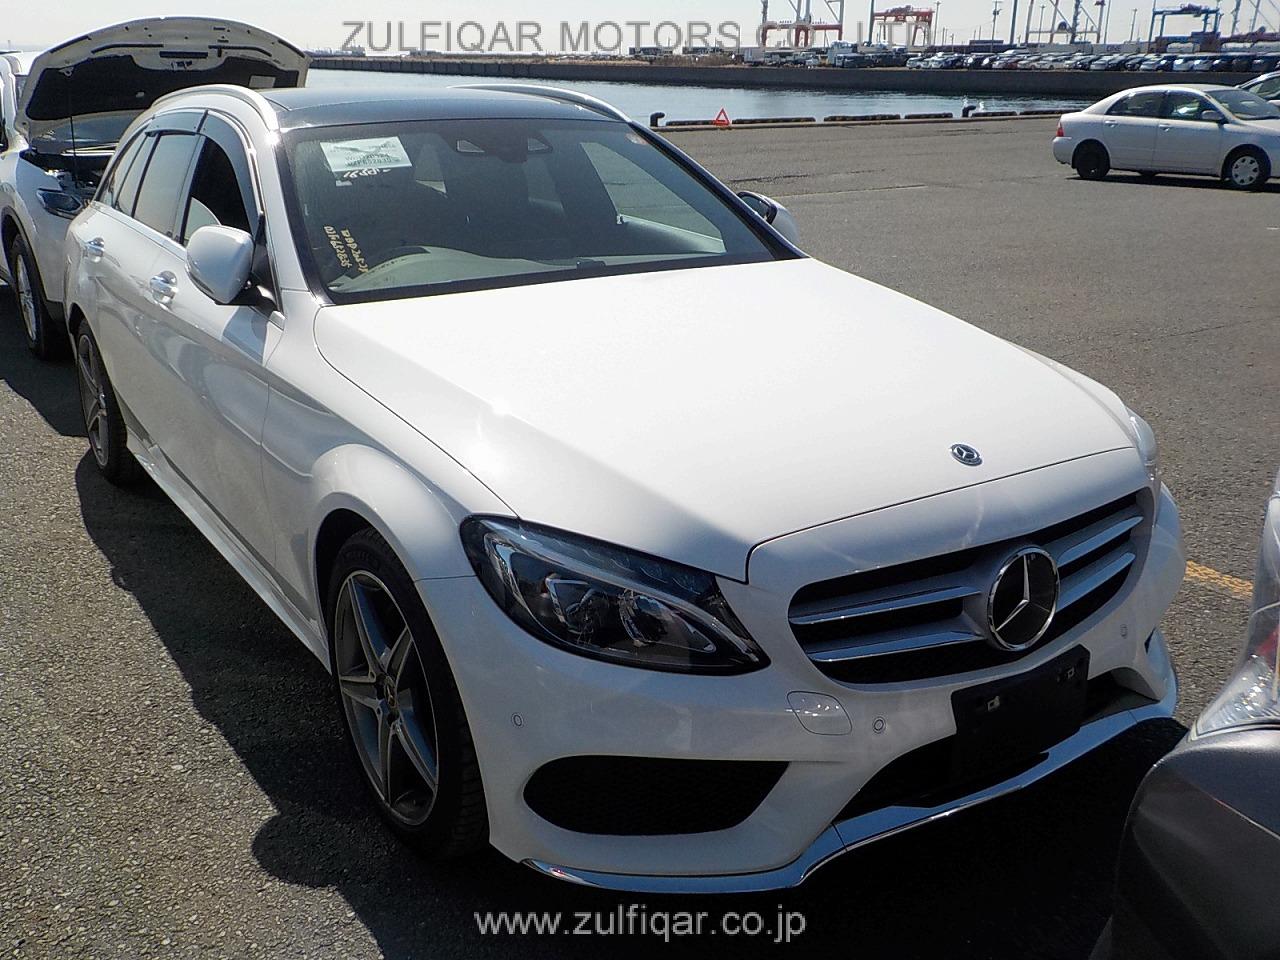 MERCEDES BENZ C CLASS STATION WAGON 2017 Image 64